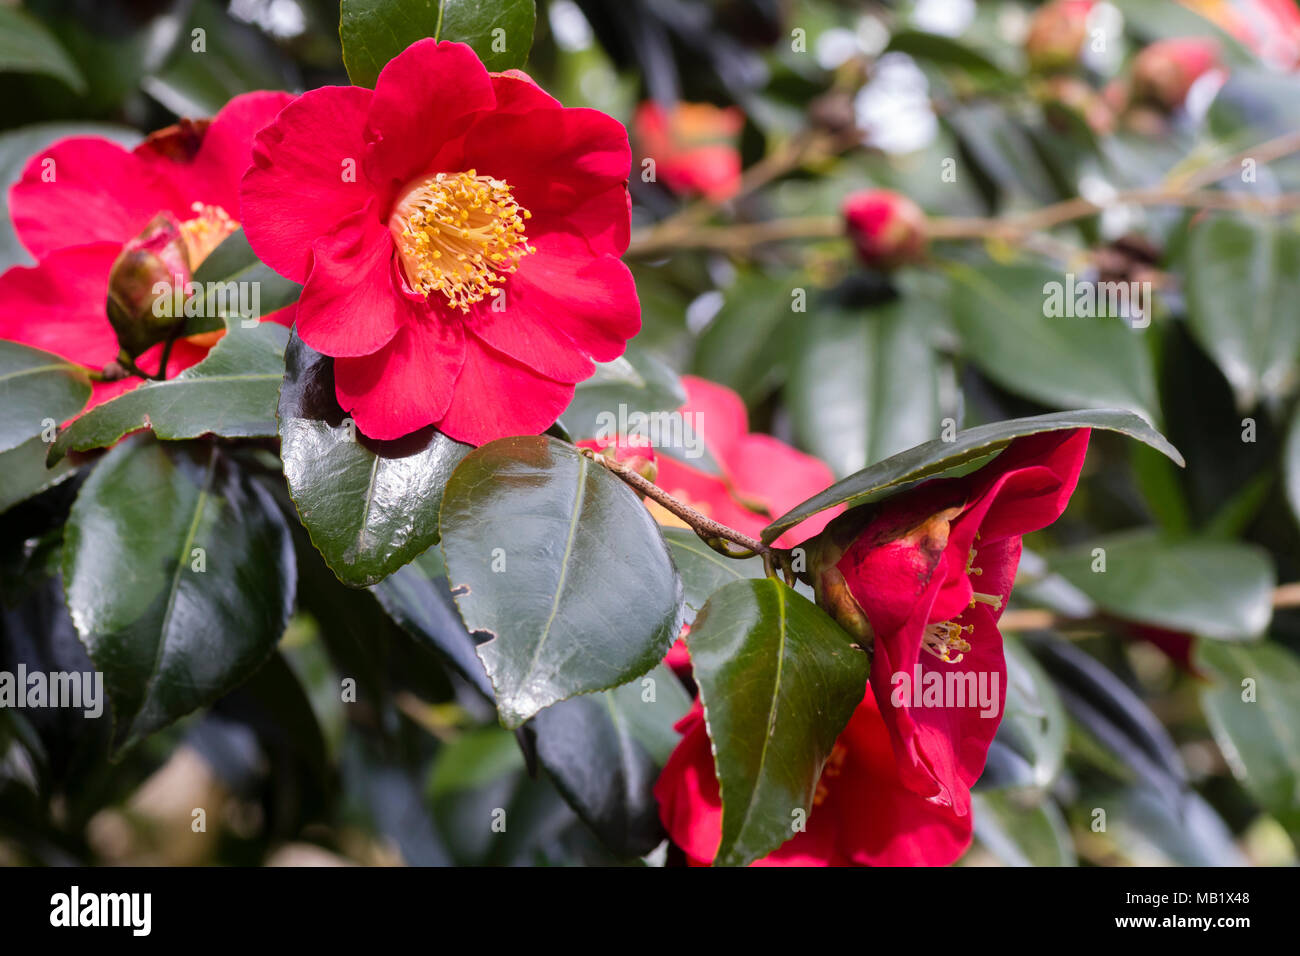 Single red spring flowers of the hardy evergreen shrub, Camellia japonica 'Jupiter', are enhanced by a boss of yellow stamens Stock Photo